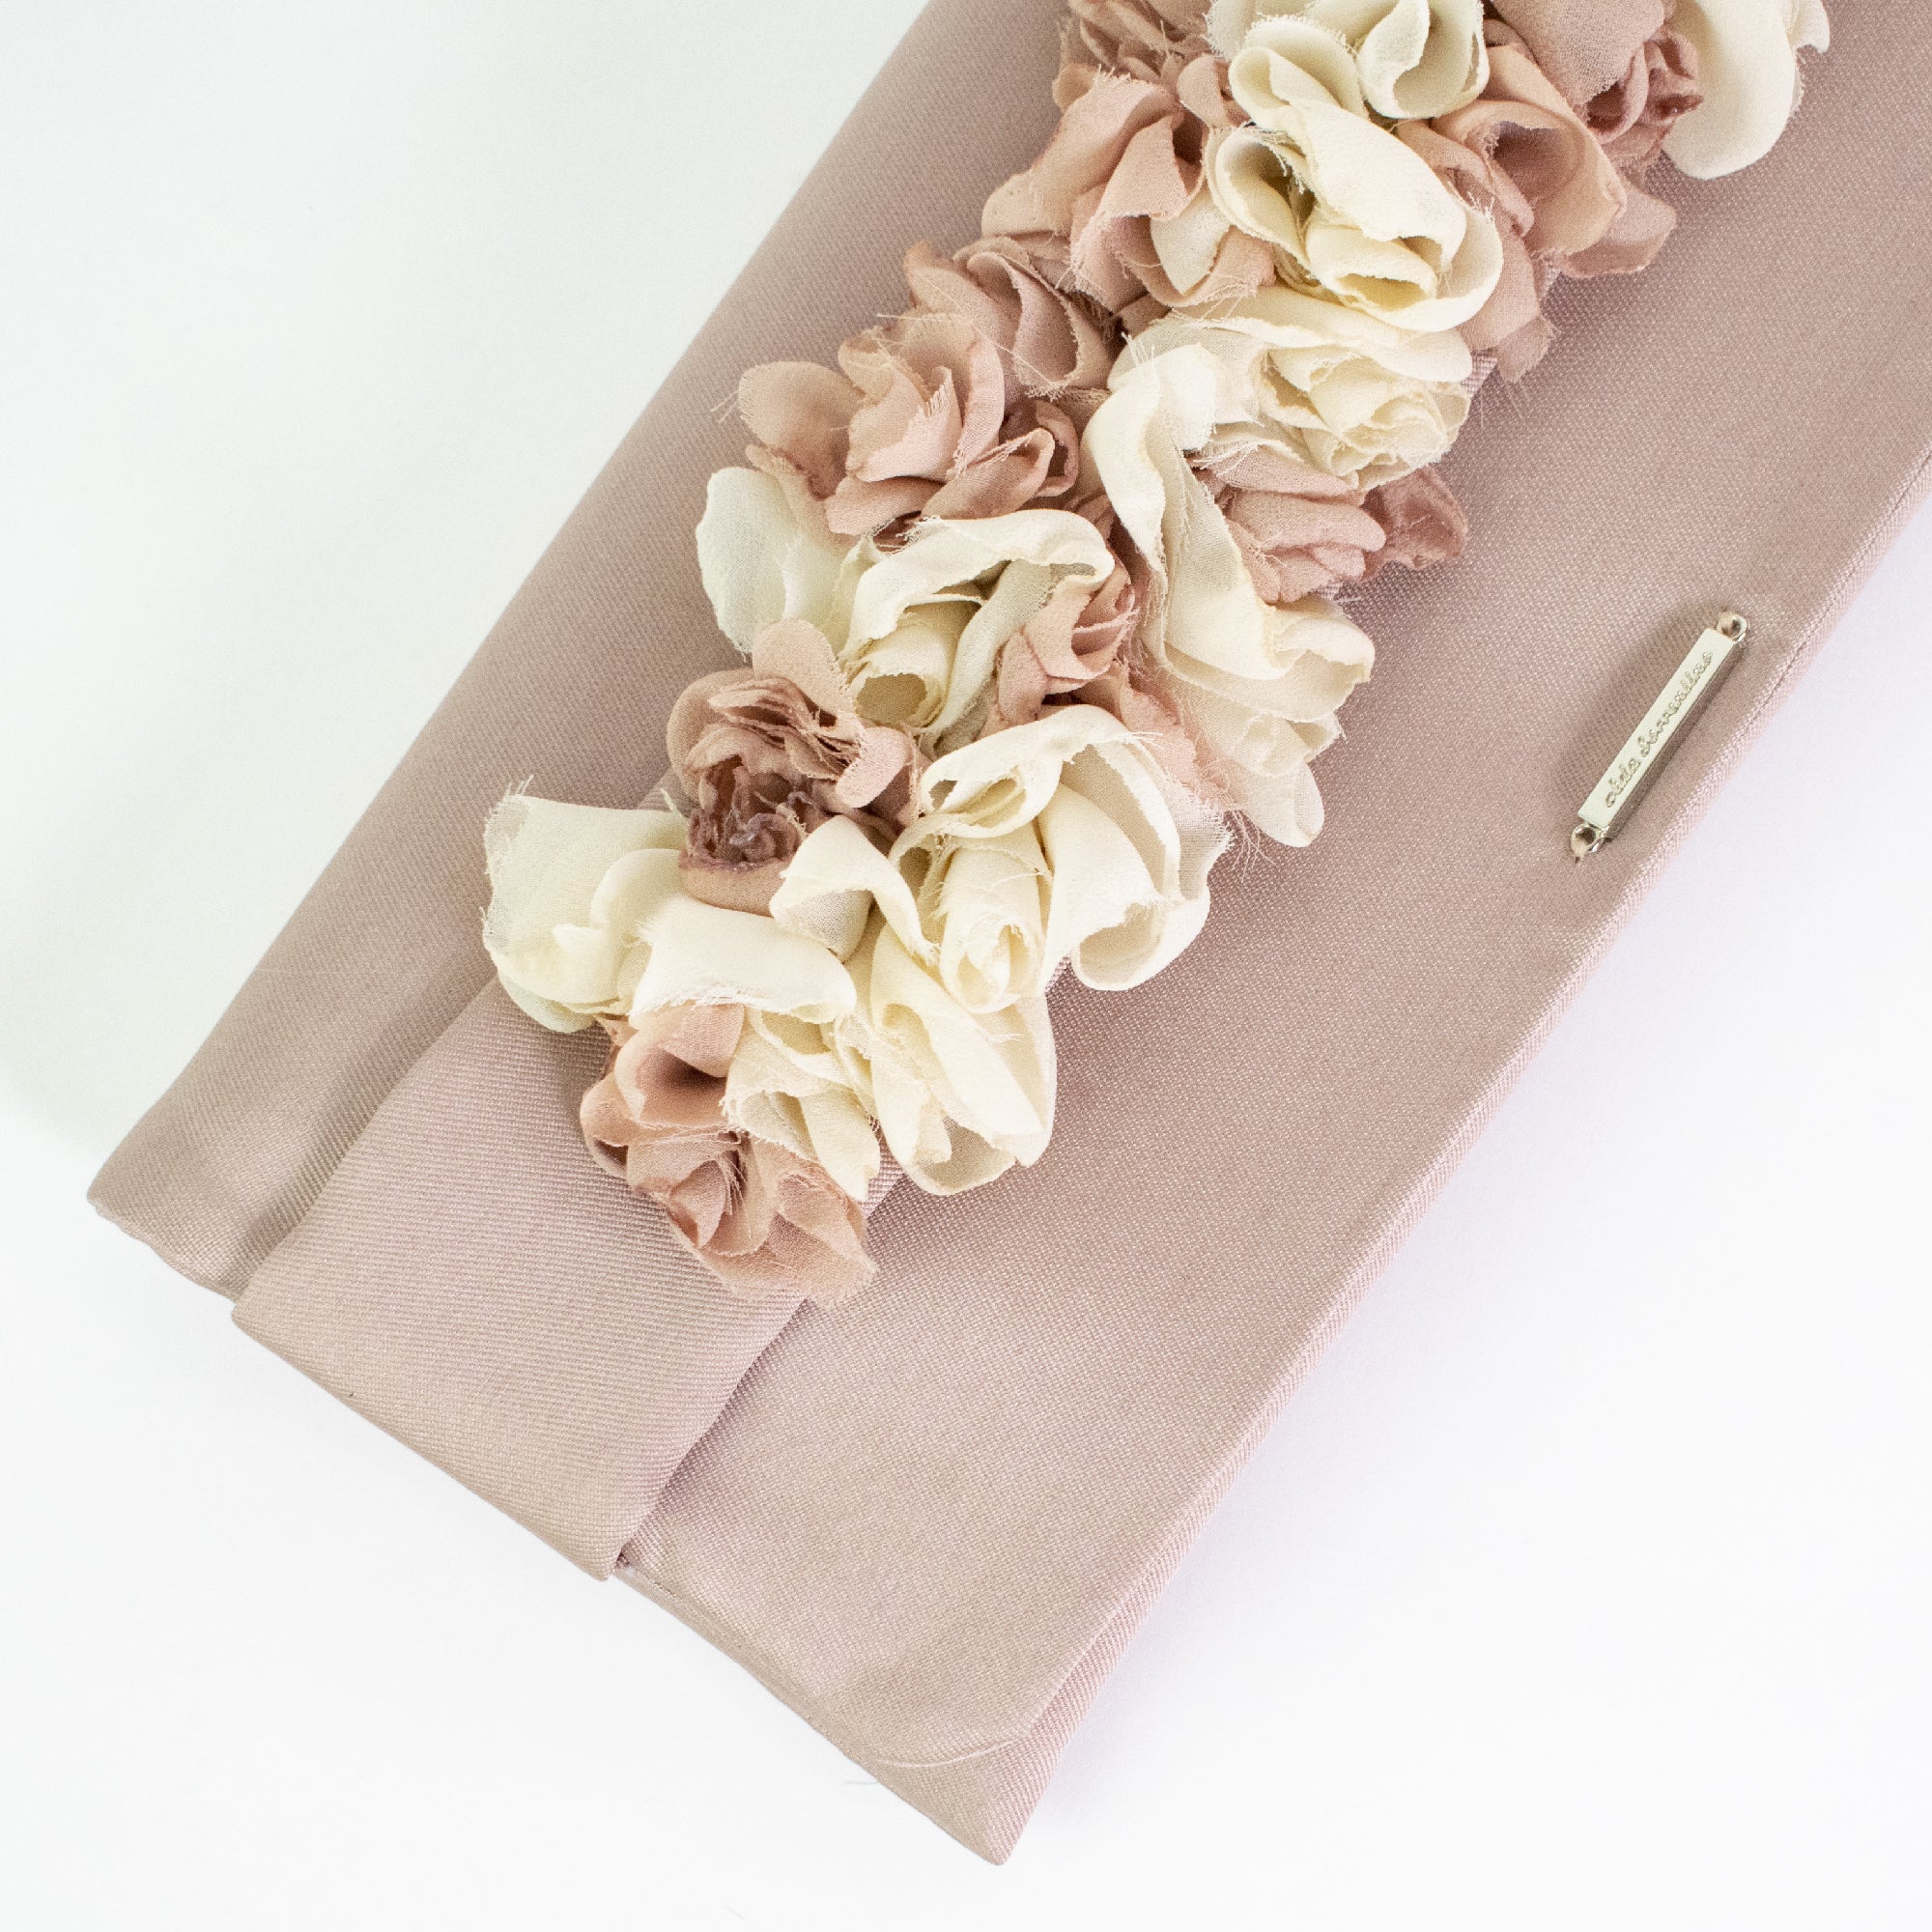 Powder pink clutch bag with two-tone flowers